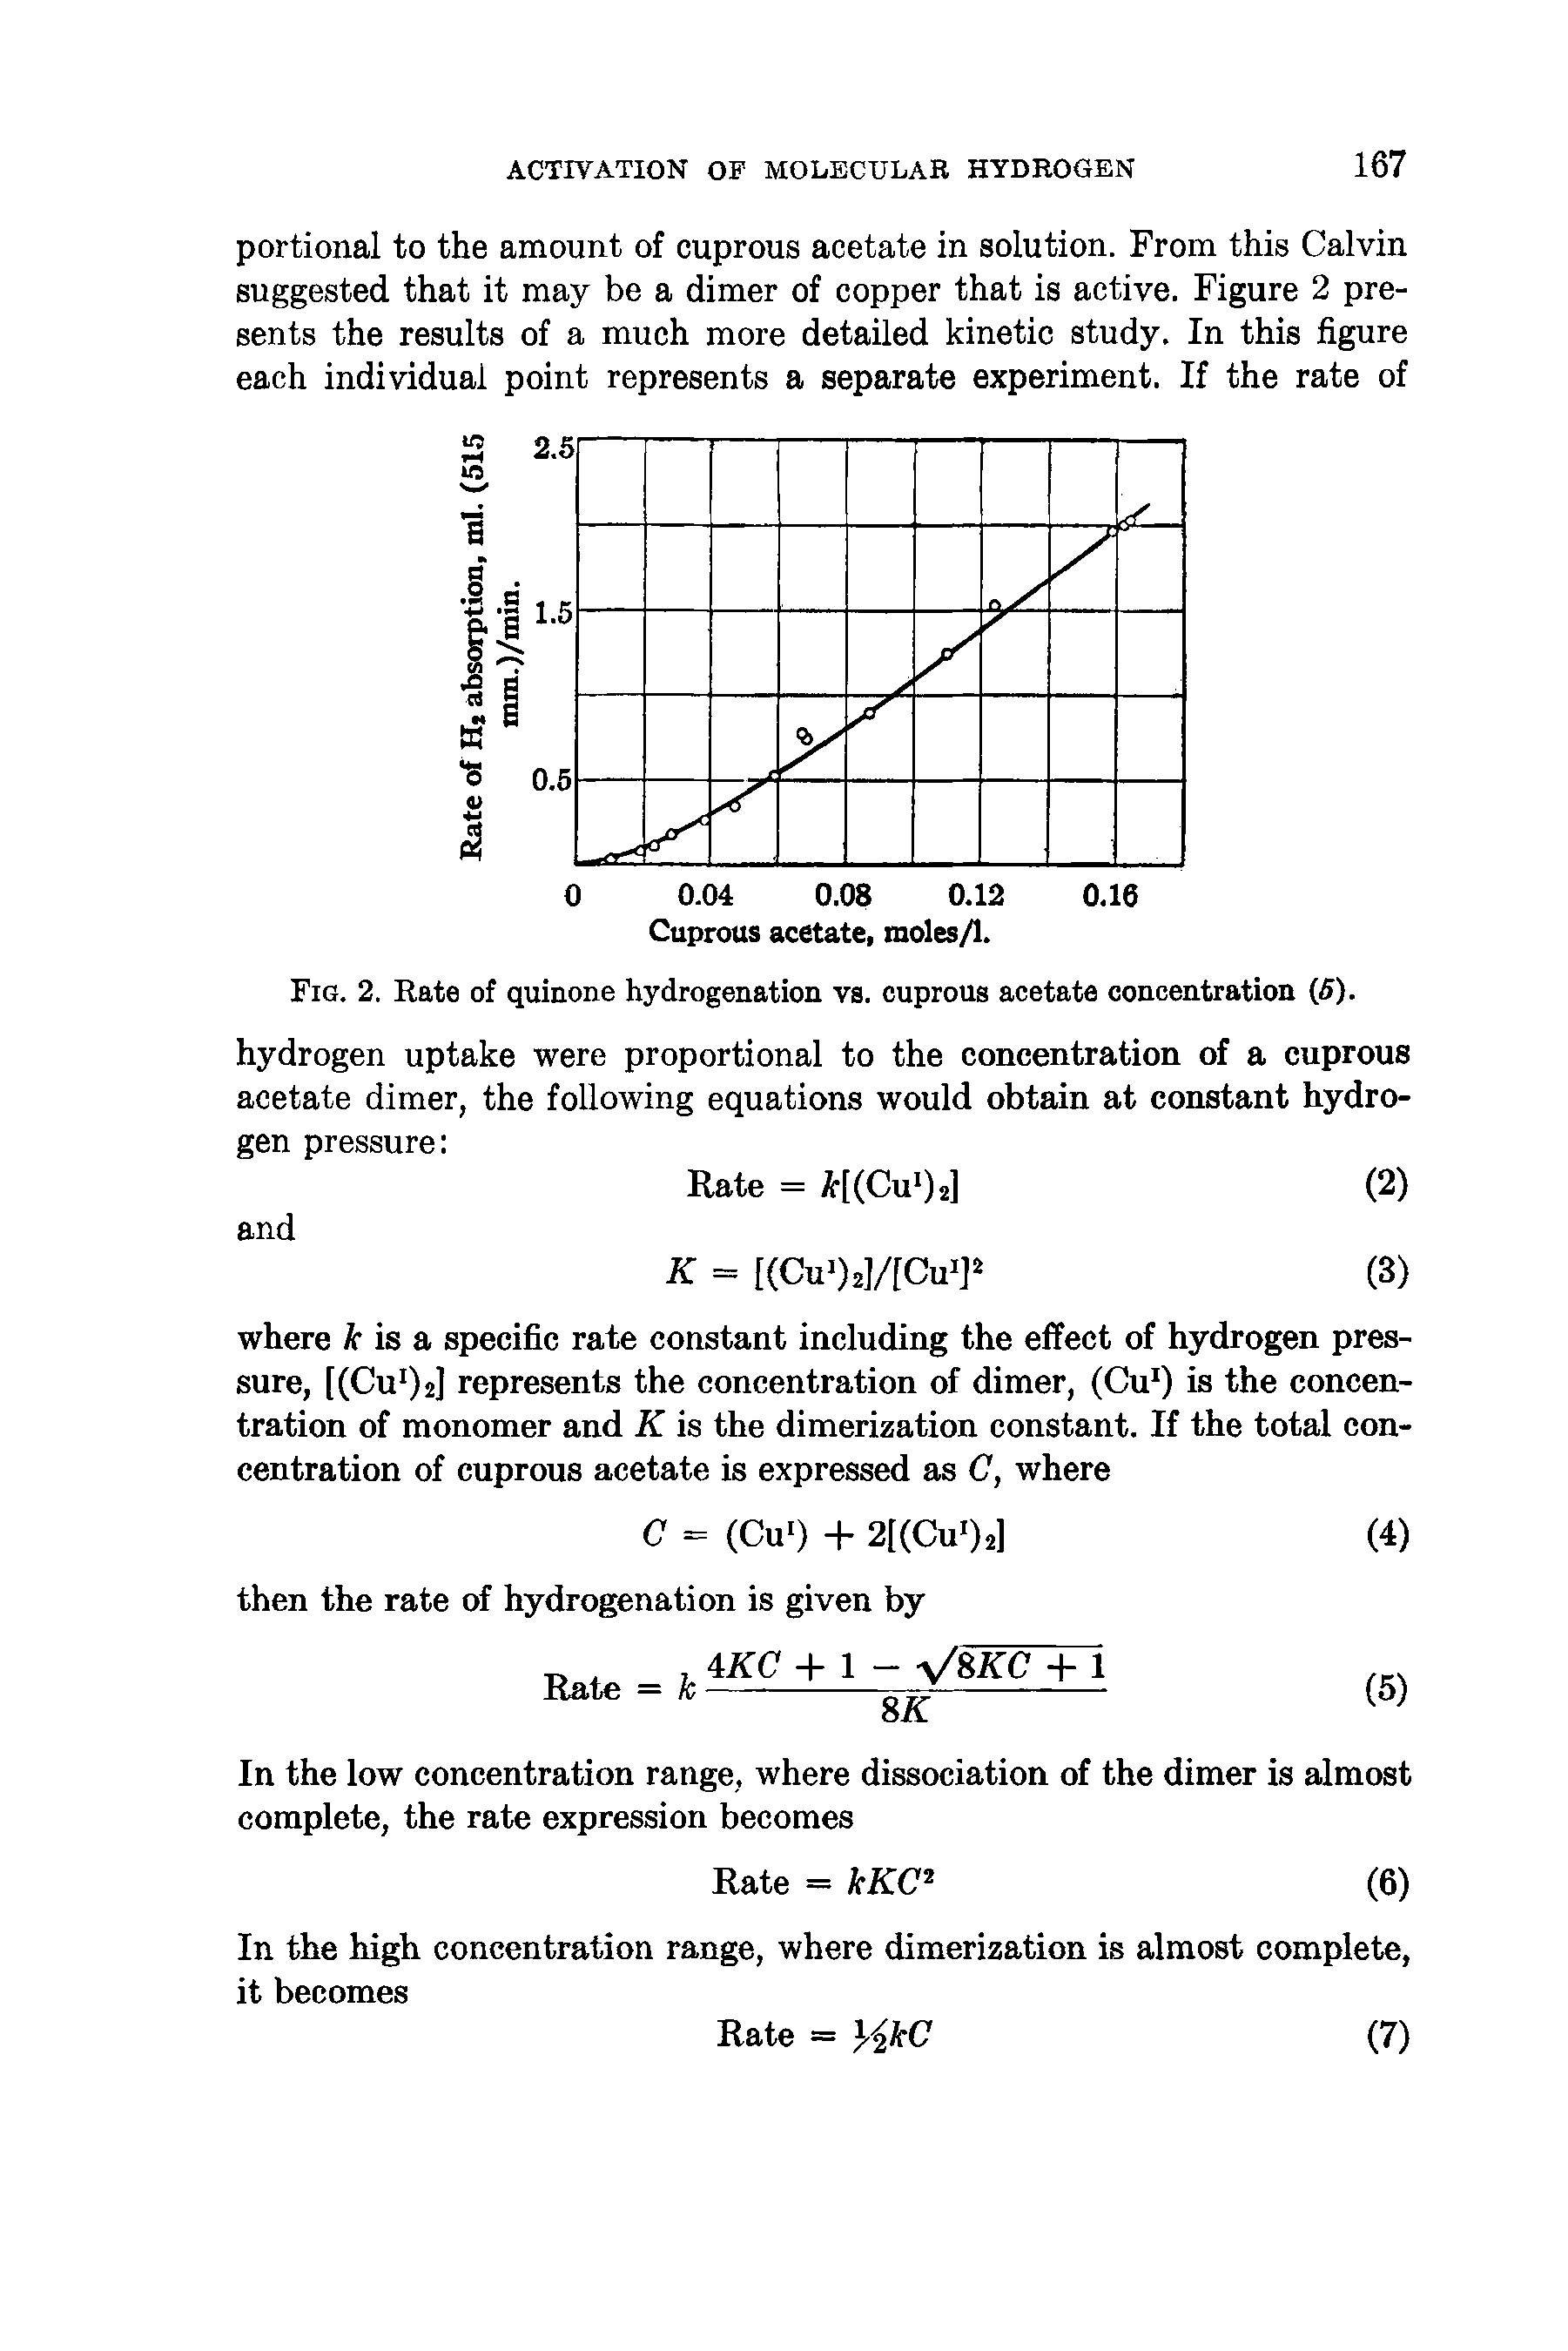 Fig. 2. Rate of quinone hydrogenation vs. cuprous acetate concentration (5).